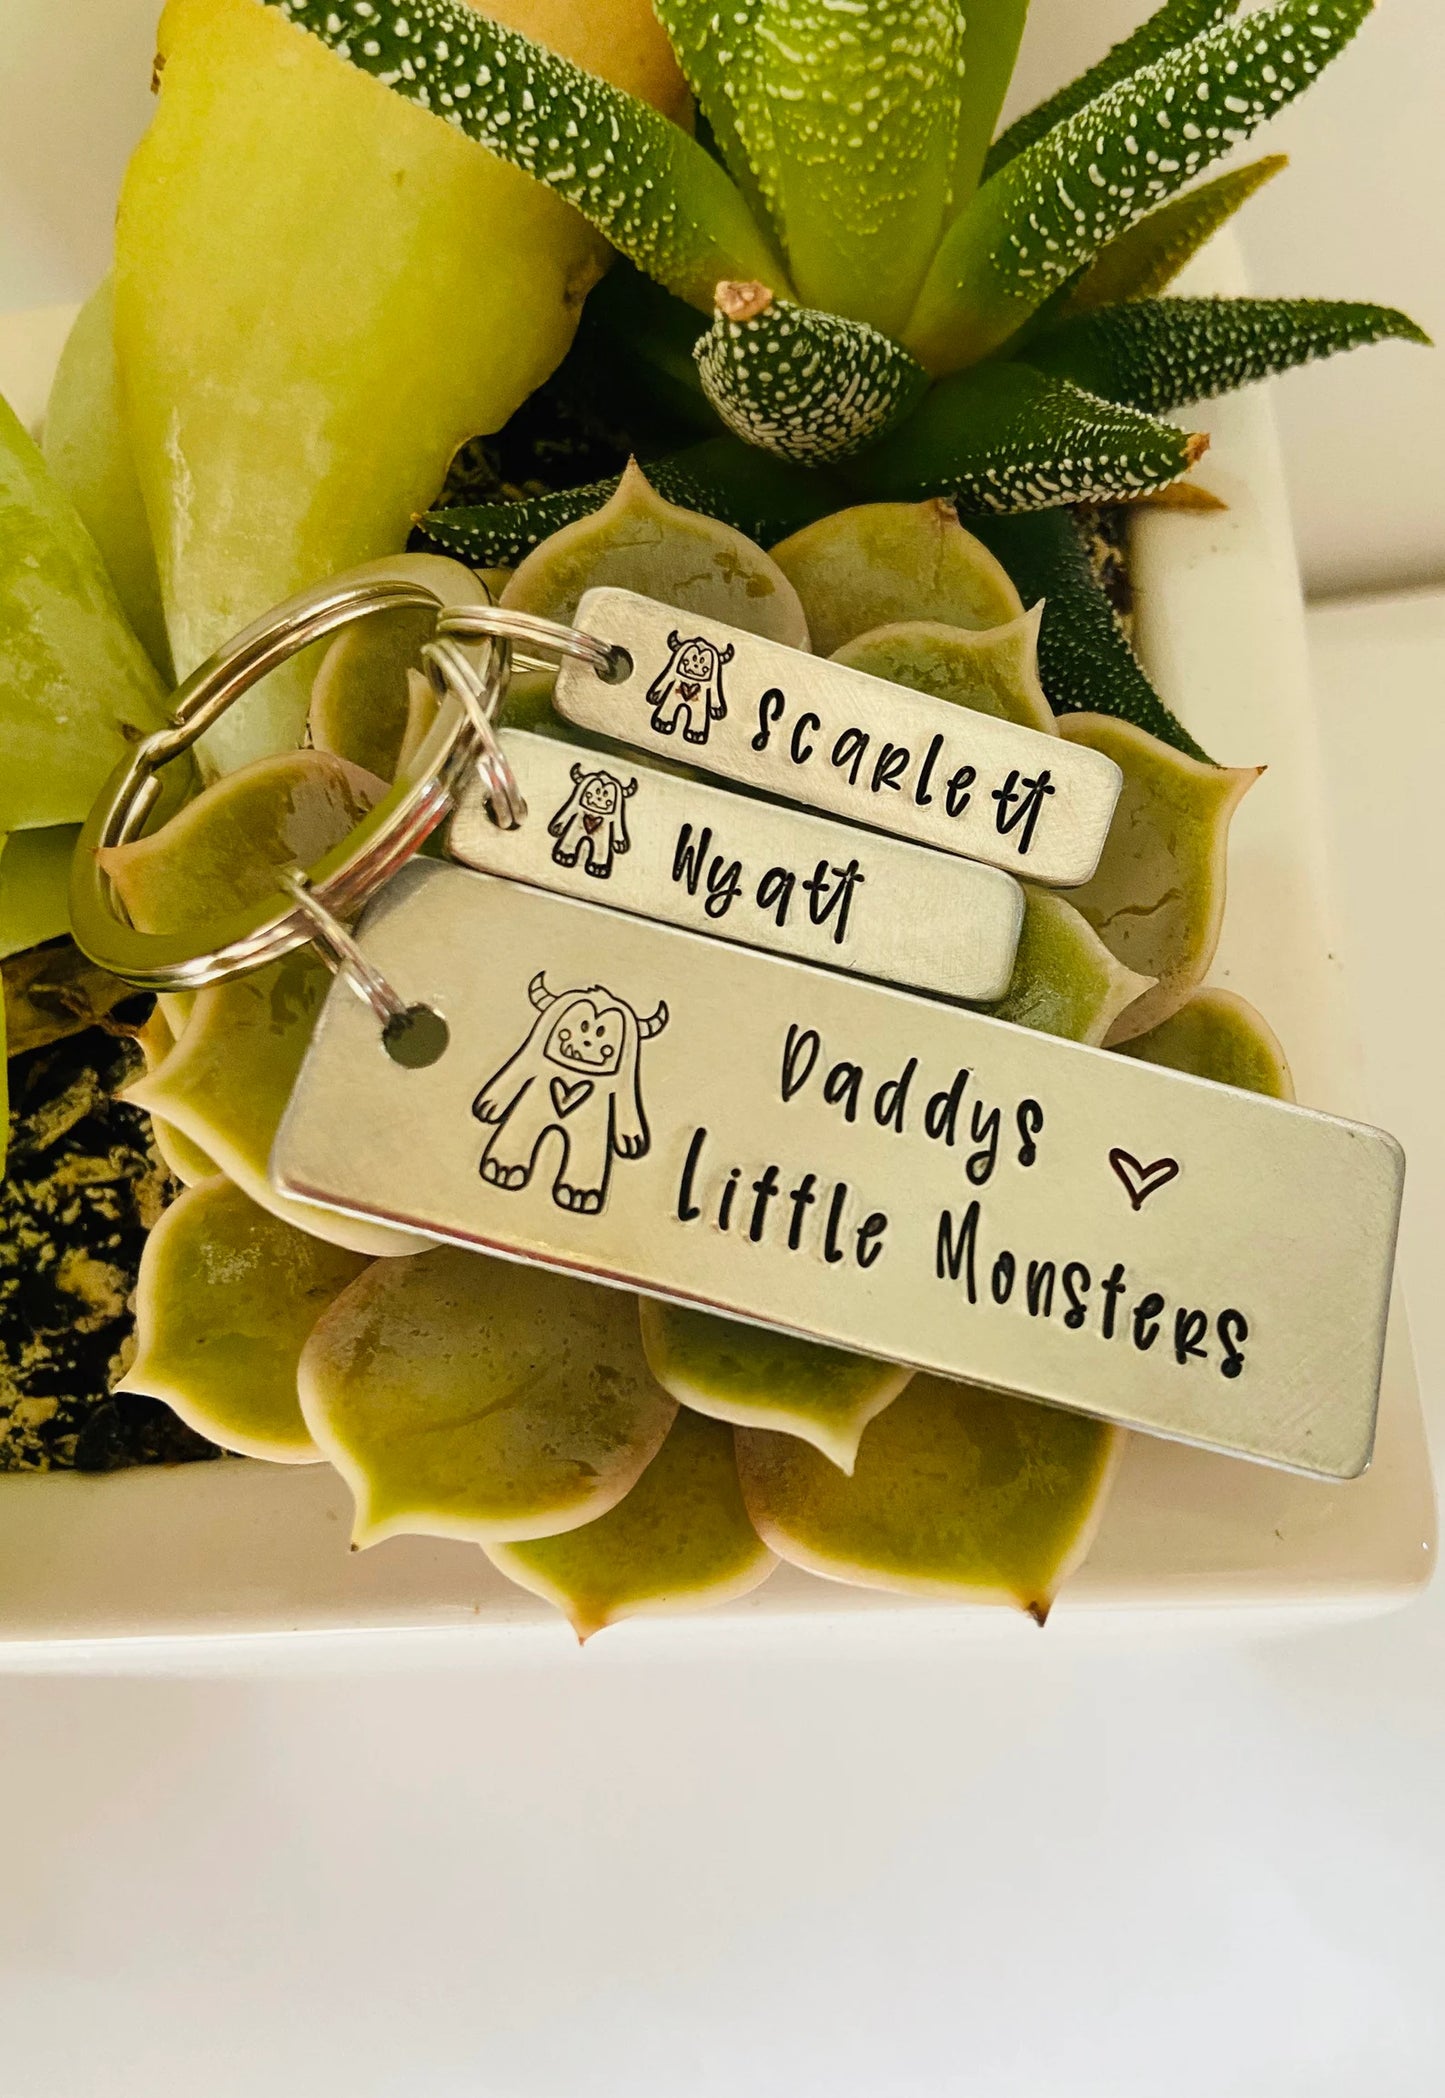 Daddy’s little monsters Father’s Day key chain personalized kids names hand stamped key chain Fathers Day grandpa papa gifts favored uncle